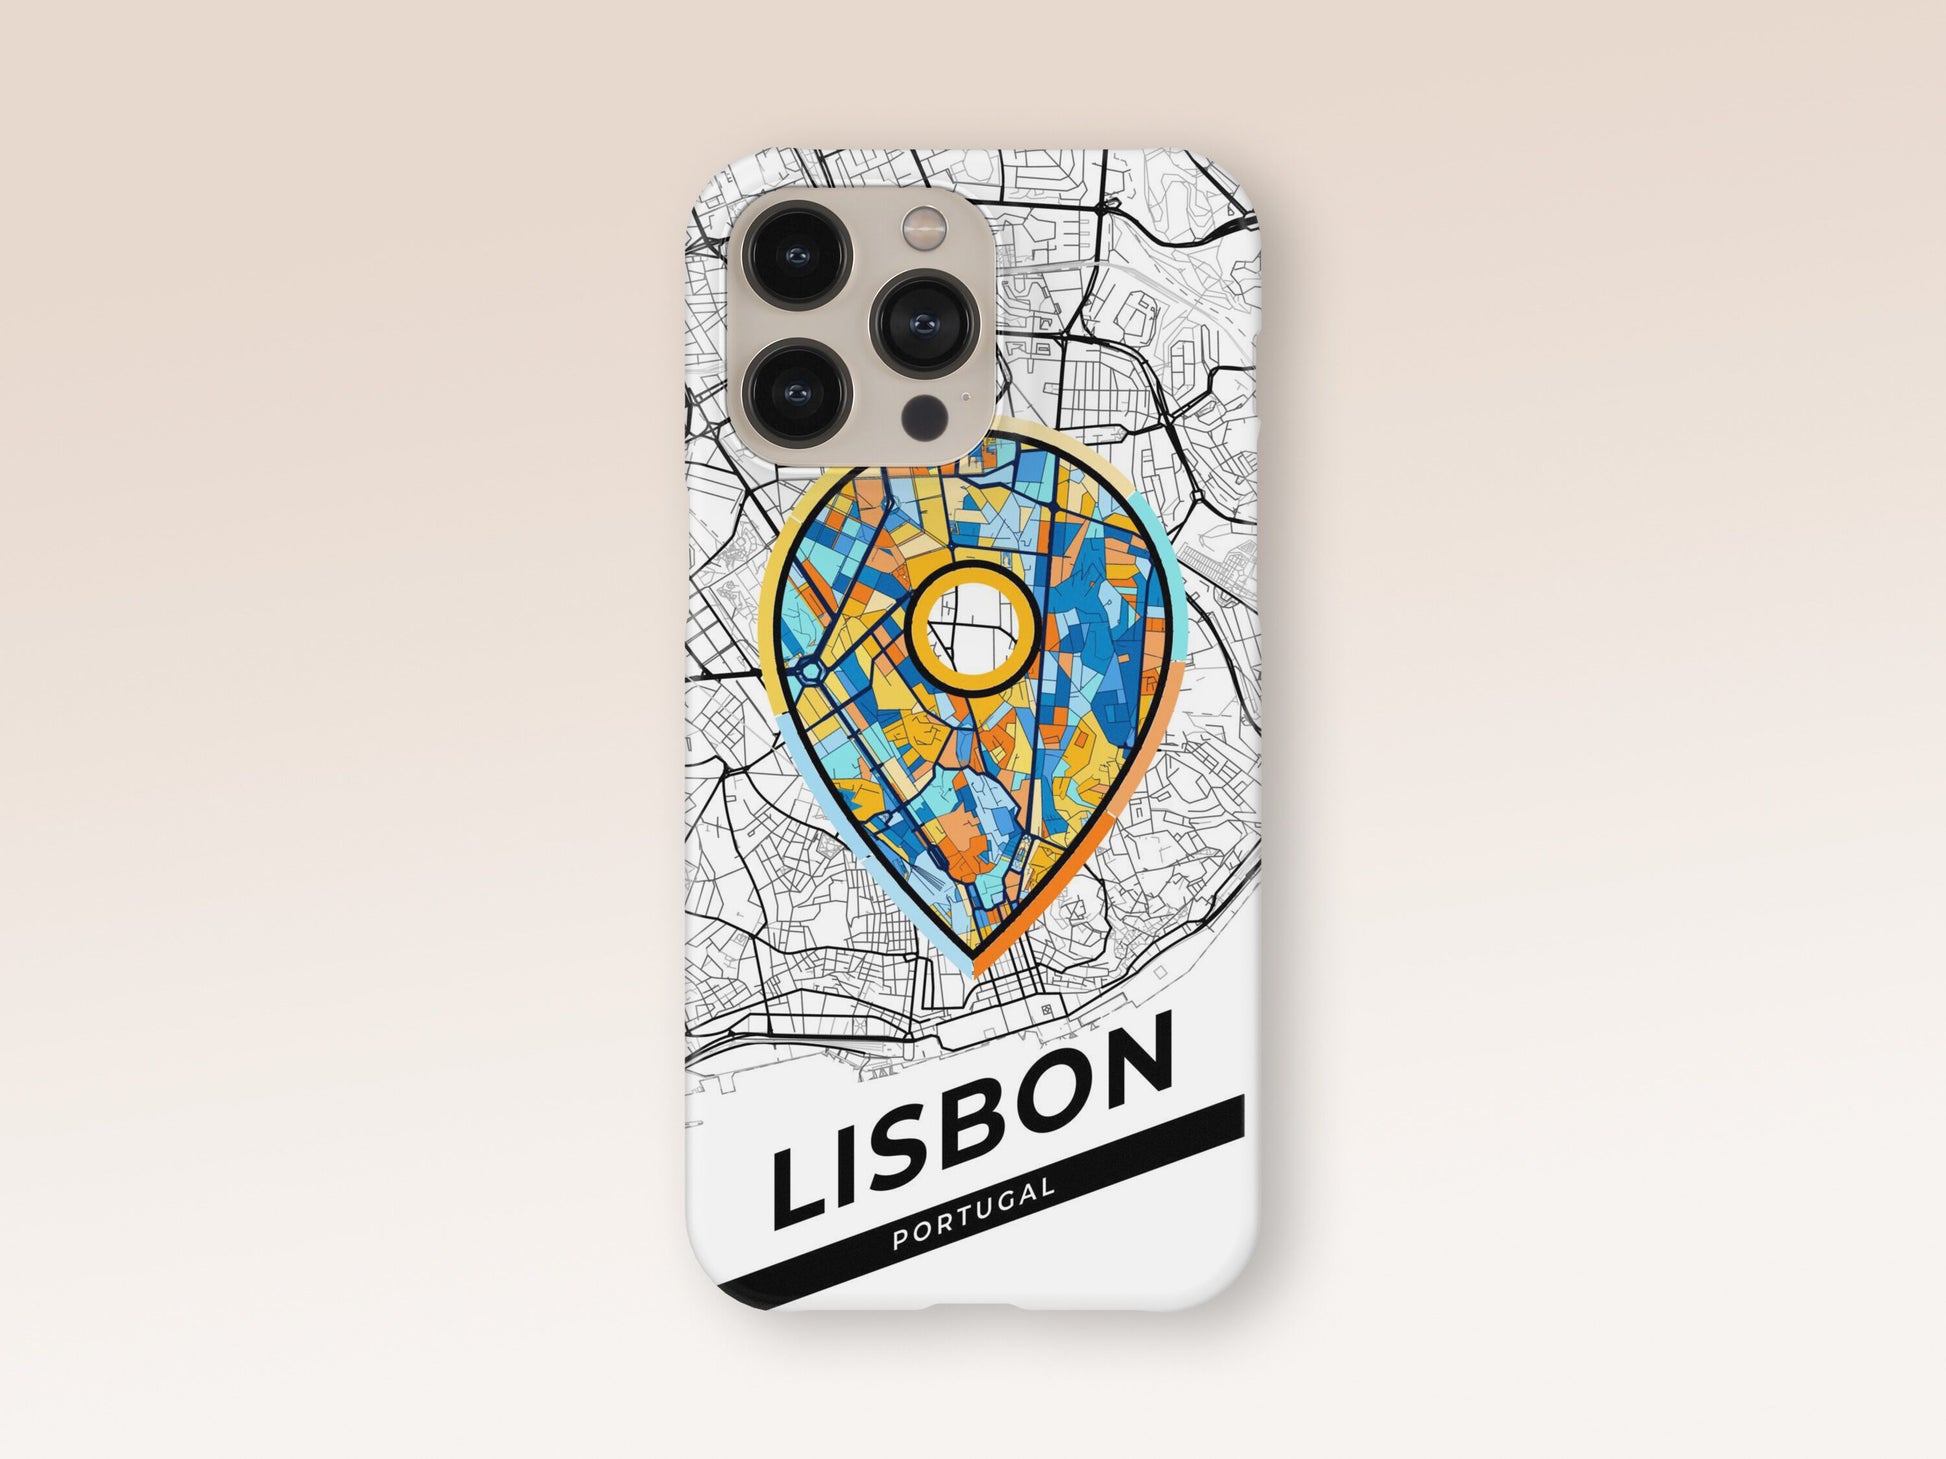 Lisbon Portugal slim phone case with colorful icon. Birthday, wedding or housewarming gift. Couple match cases. 1